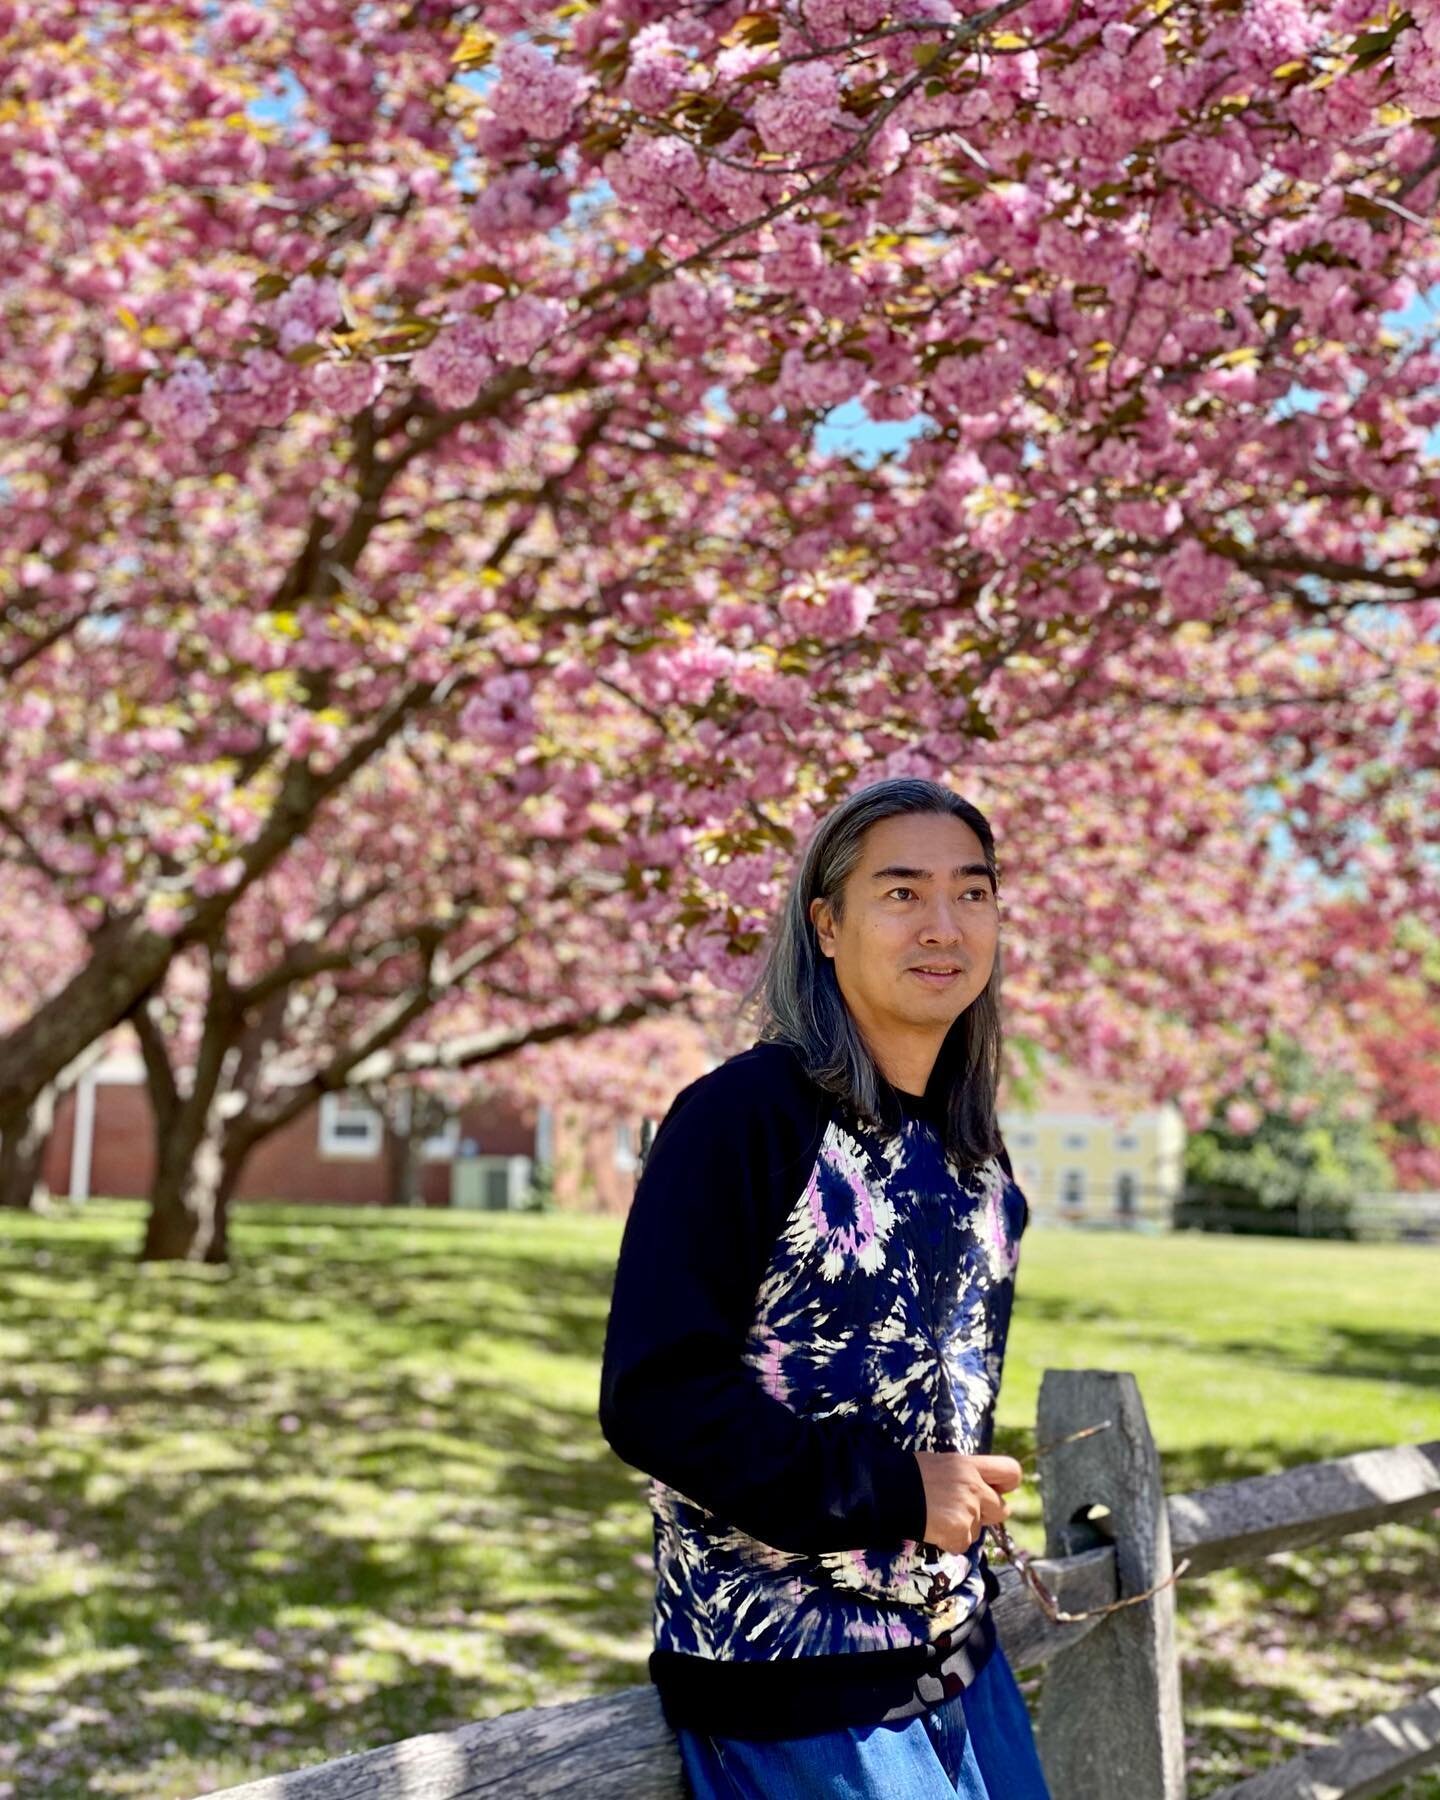 #canitellyou finally got some reprieve from all the rain. Go out there and enjoy the cherry blossoms while you can. / 🌸🌸🌸
.
.
.
#cherryblossomseason #seethemwhileyoucan #sakuraseason🌸 #aapiheritagemonth #veryasianandveryproud #northforkspring #ra